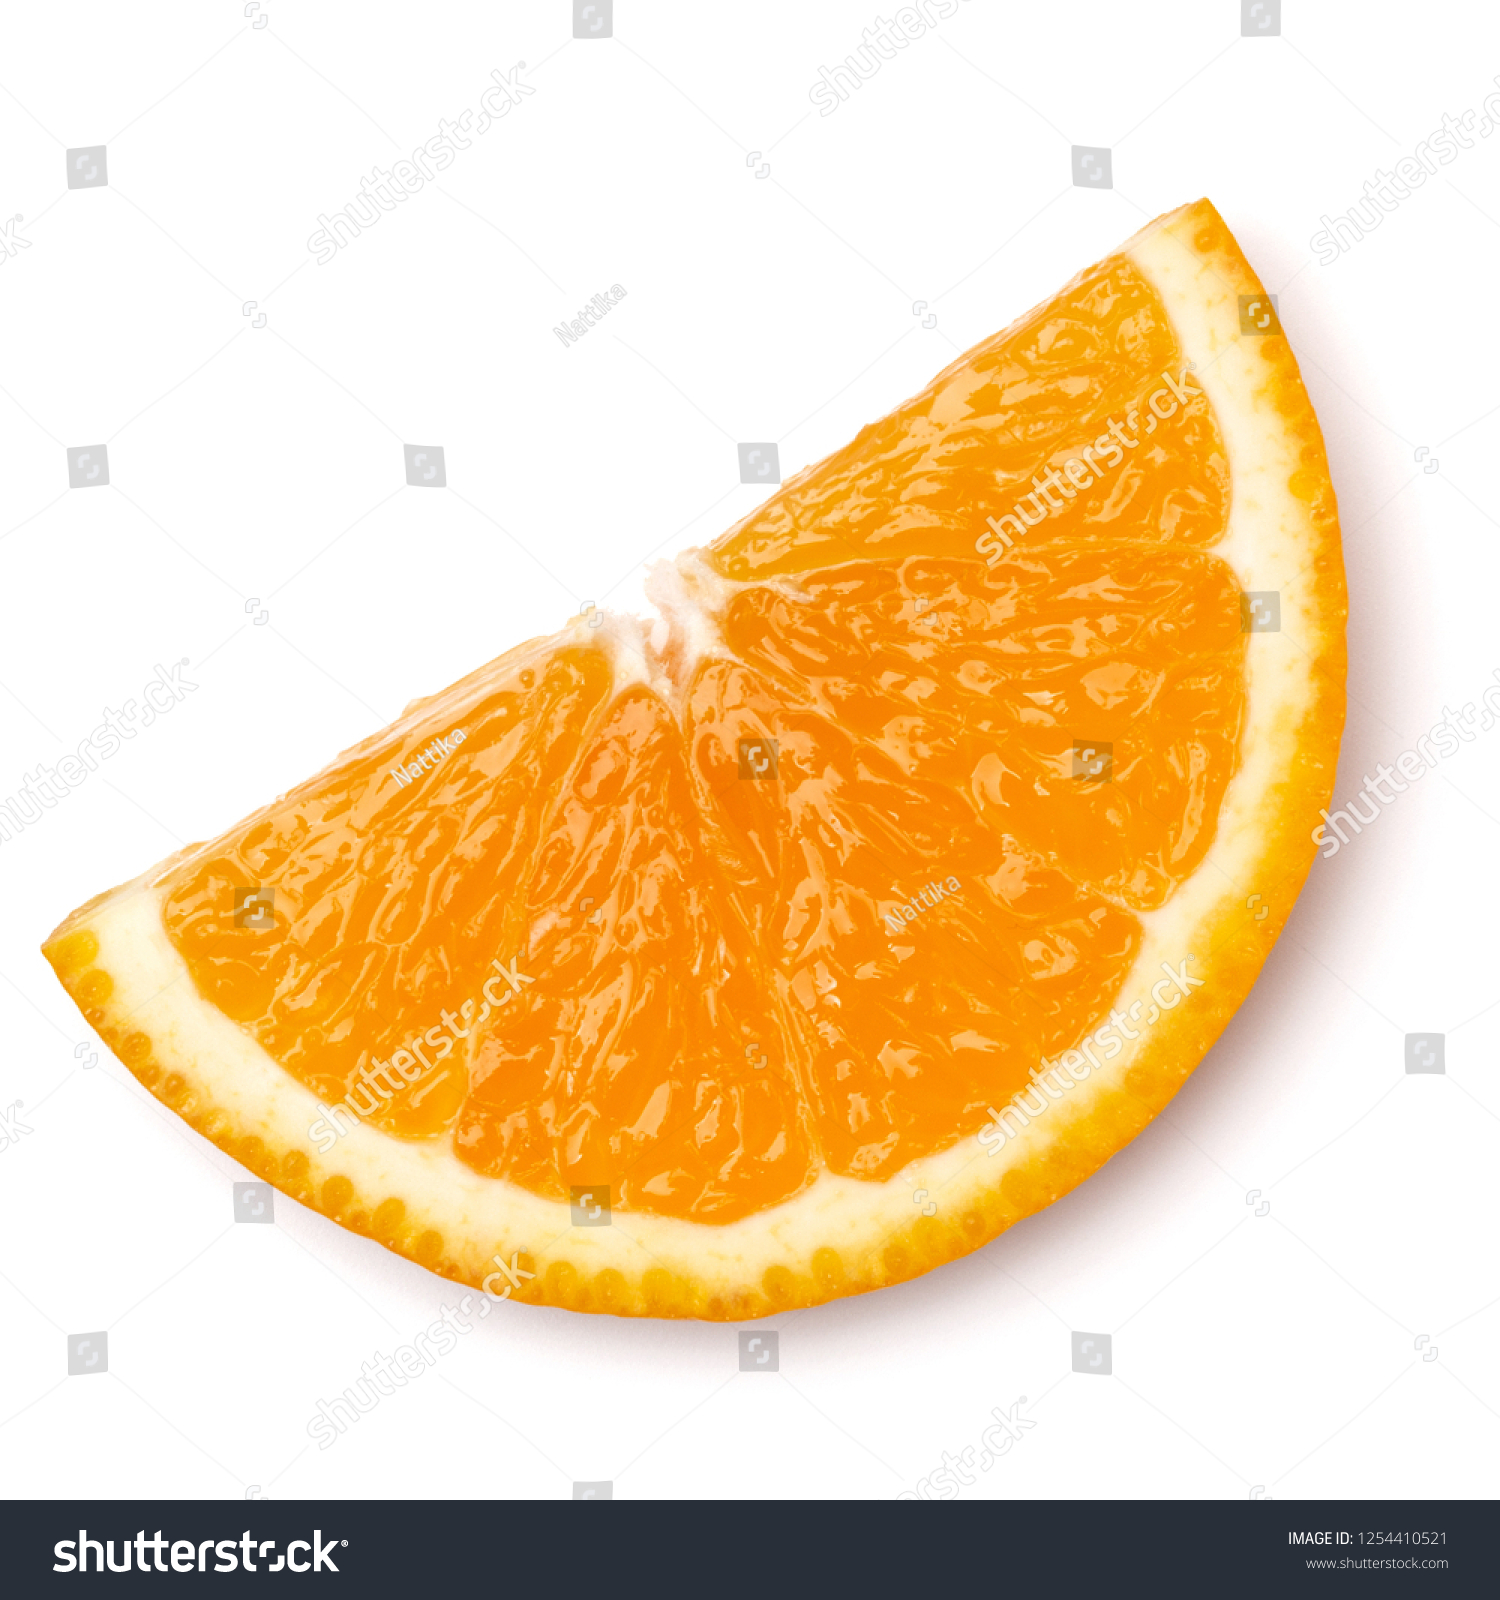 Orange fruit slice  isolated on white background closeup. Food background. Flat lay, top view. #1254410521